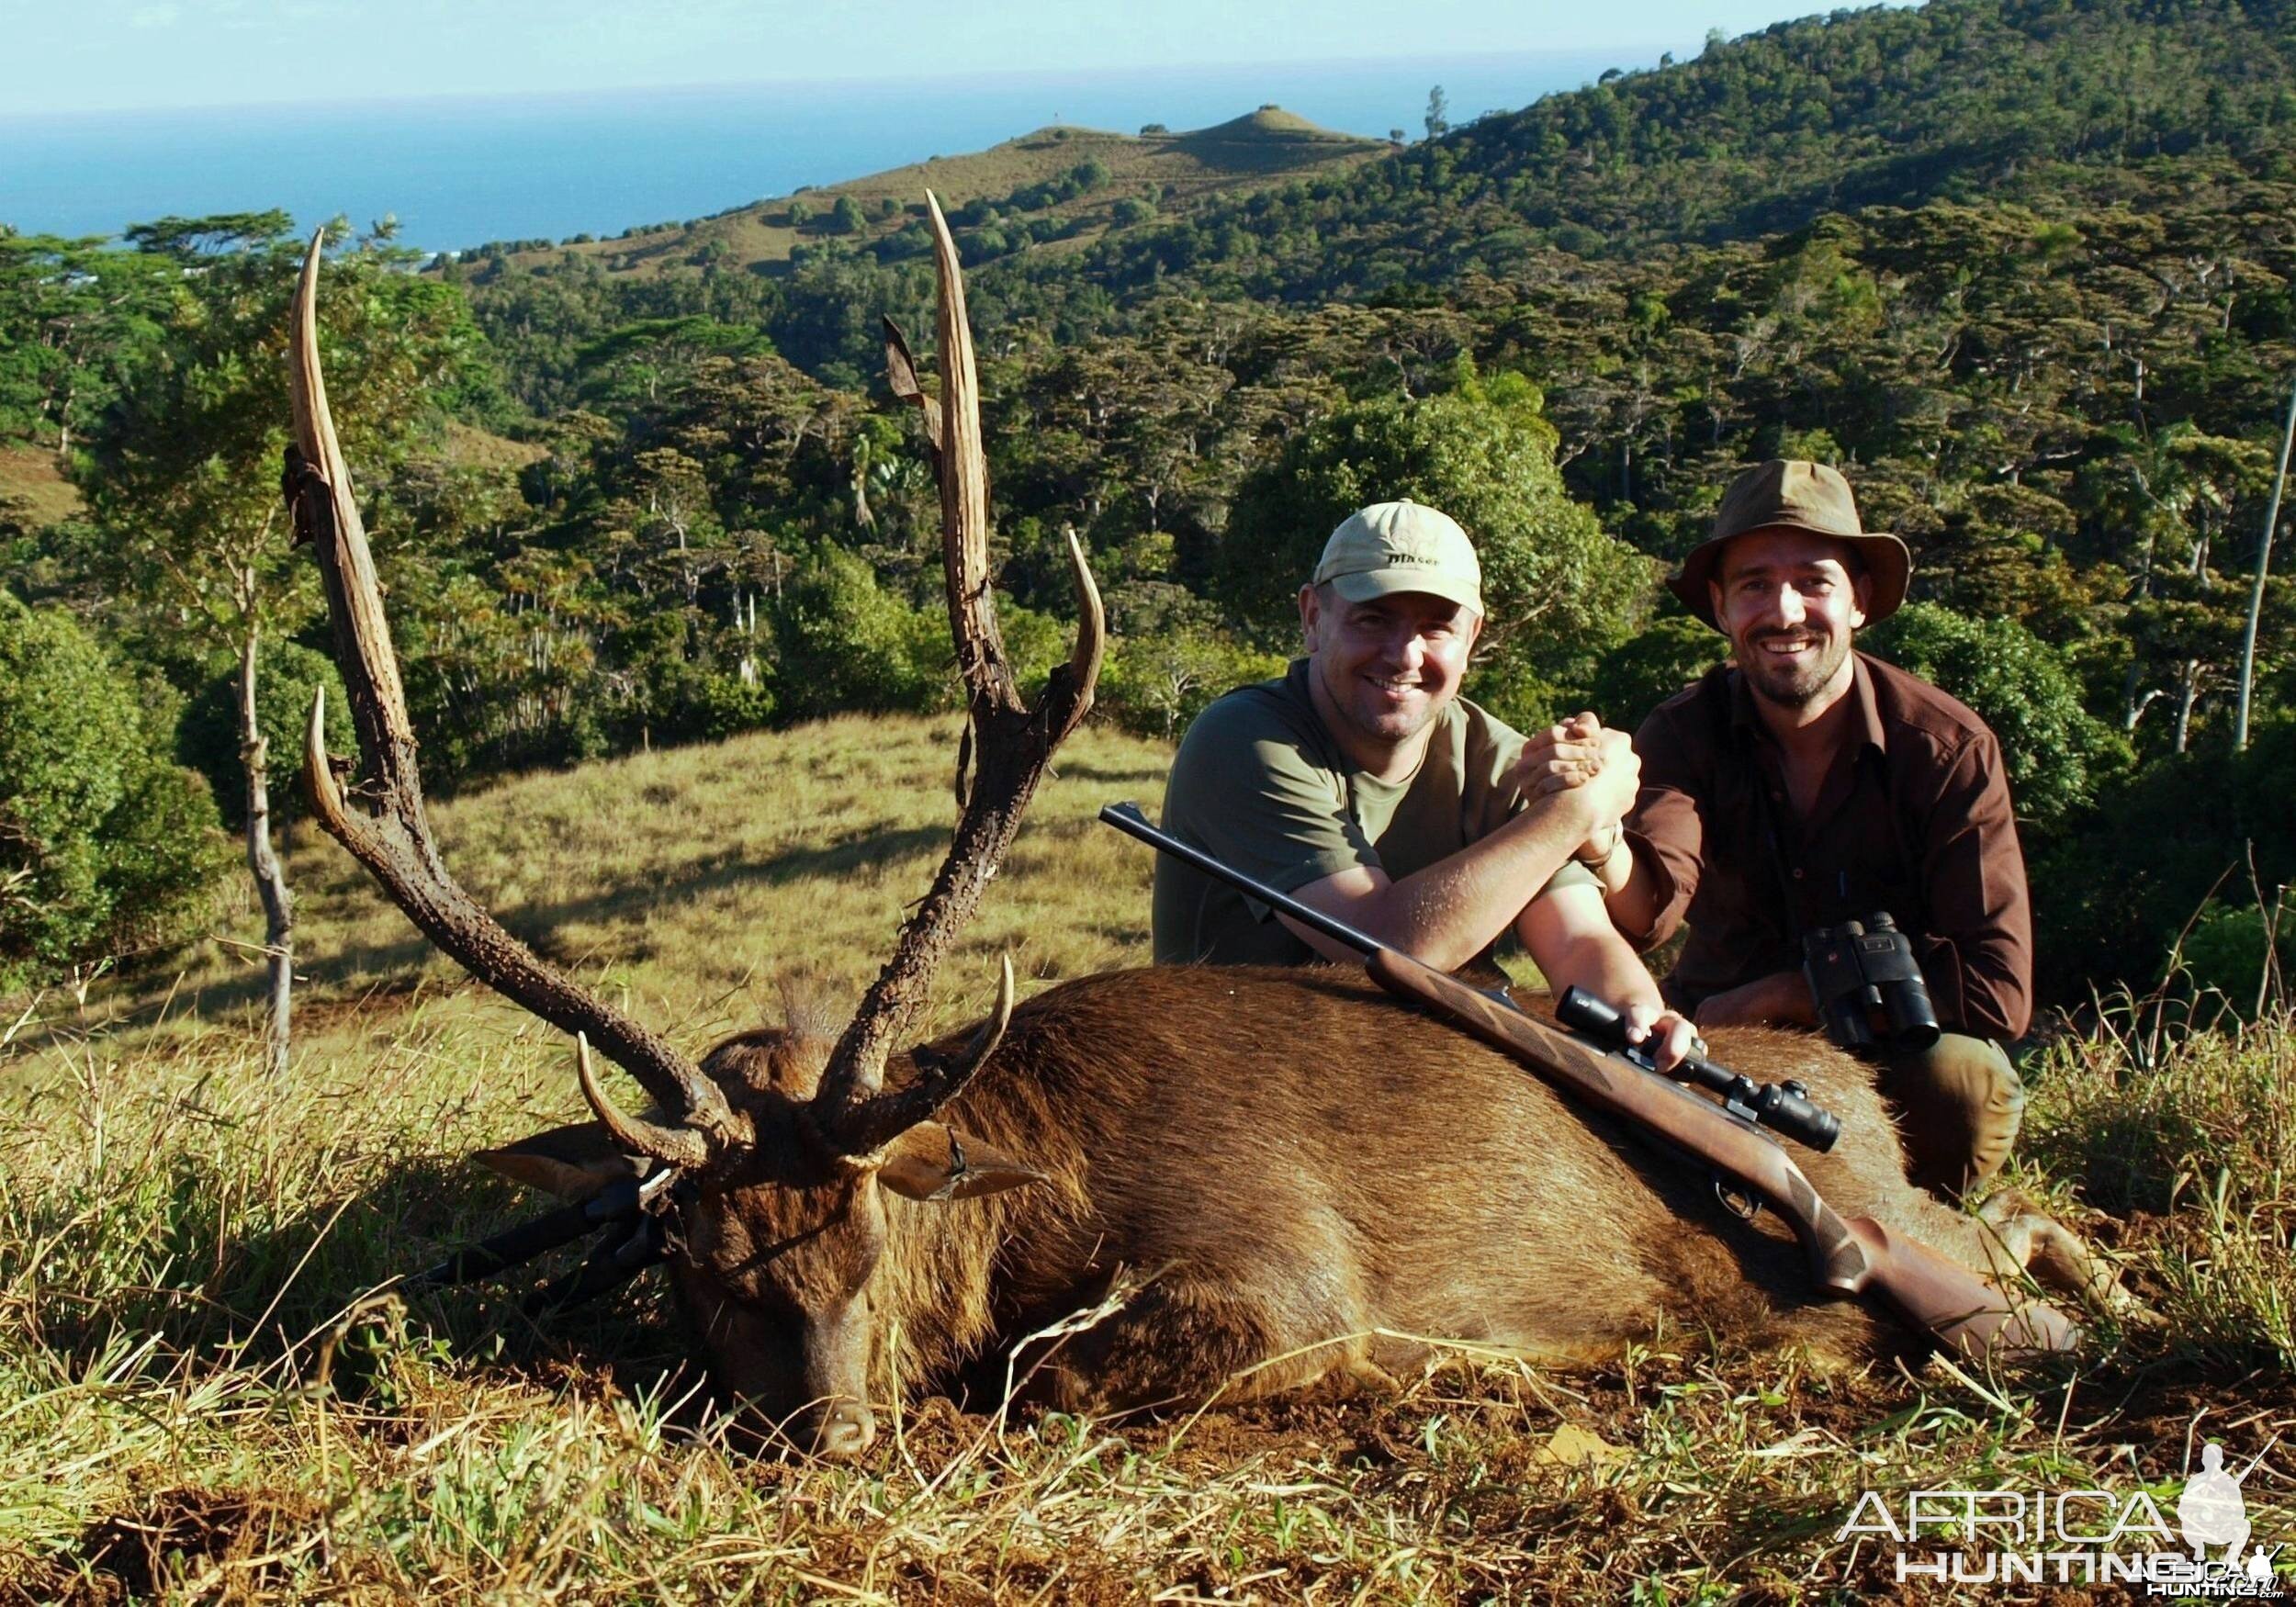 A 37 inches rusa deer hunted with "le chasseur mauricien ltd" in